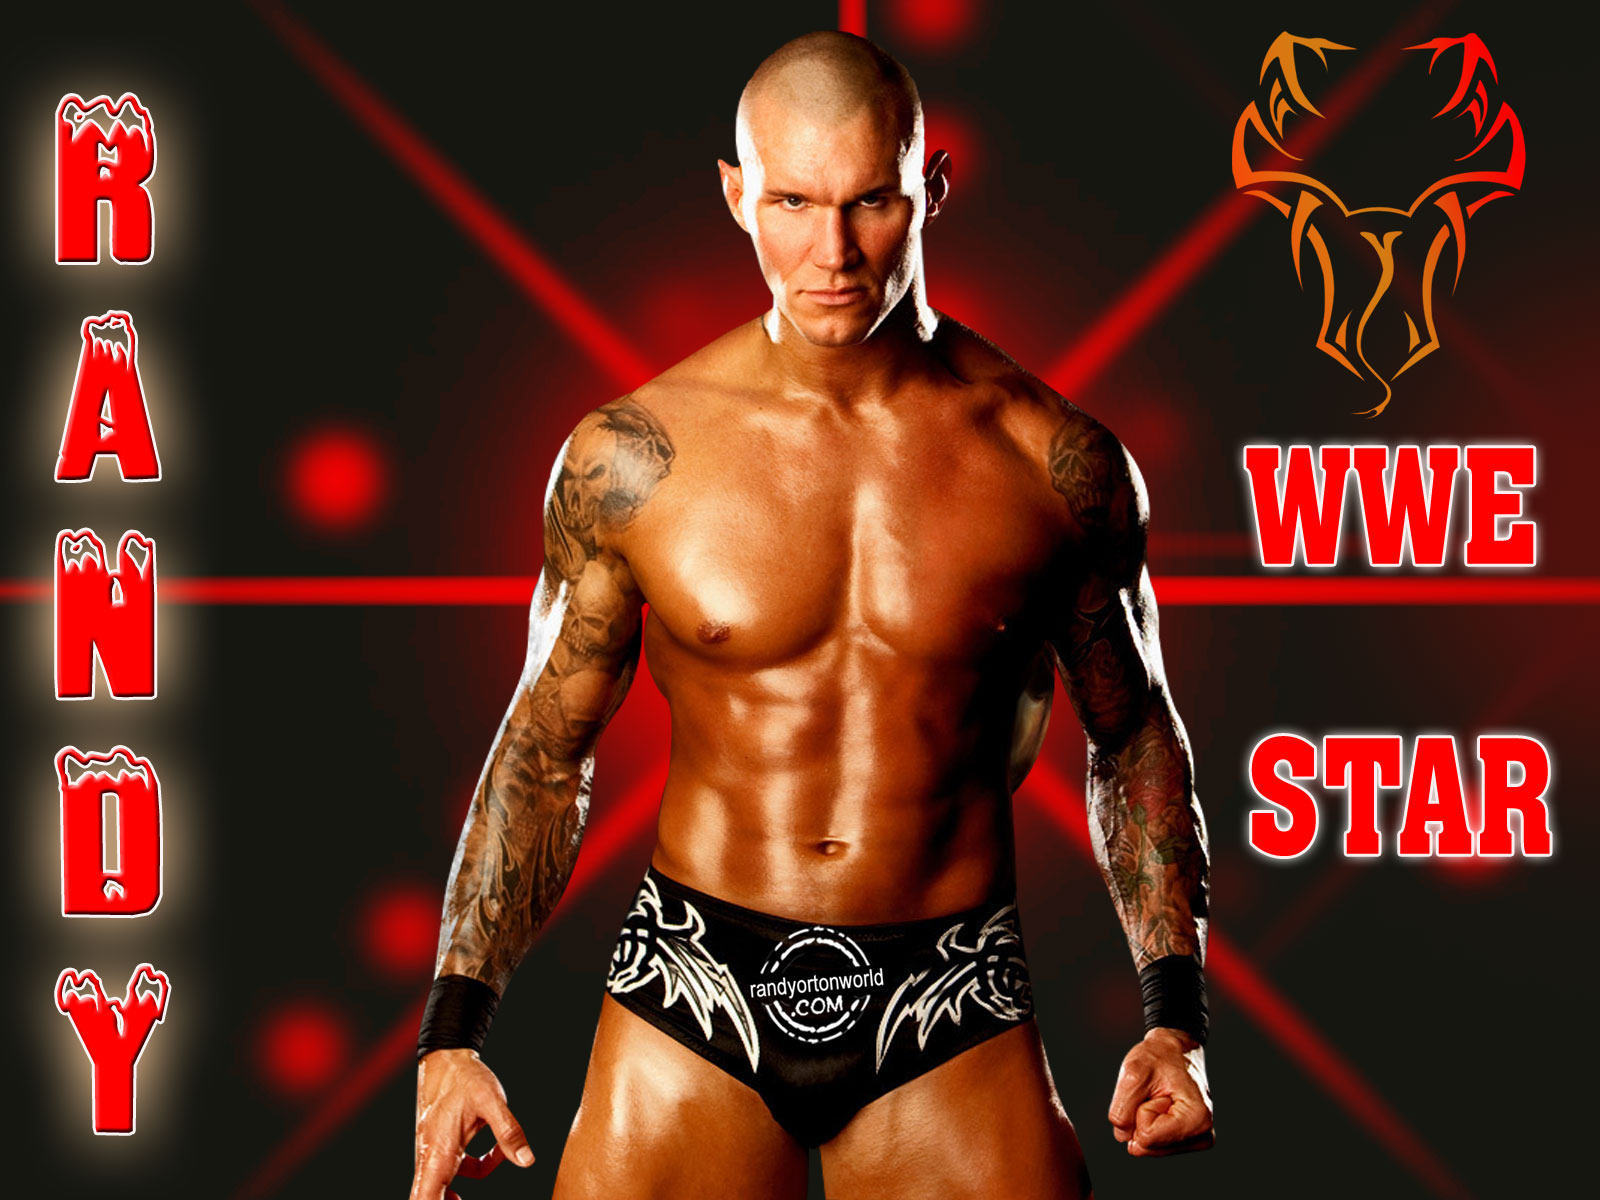 More Entries Randy Orton The Wwe Superstar Wallpaper